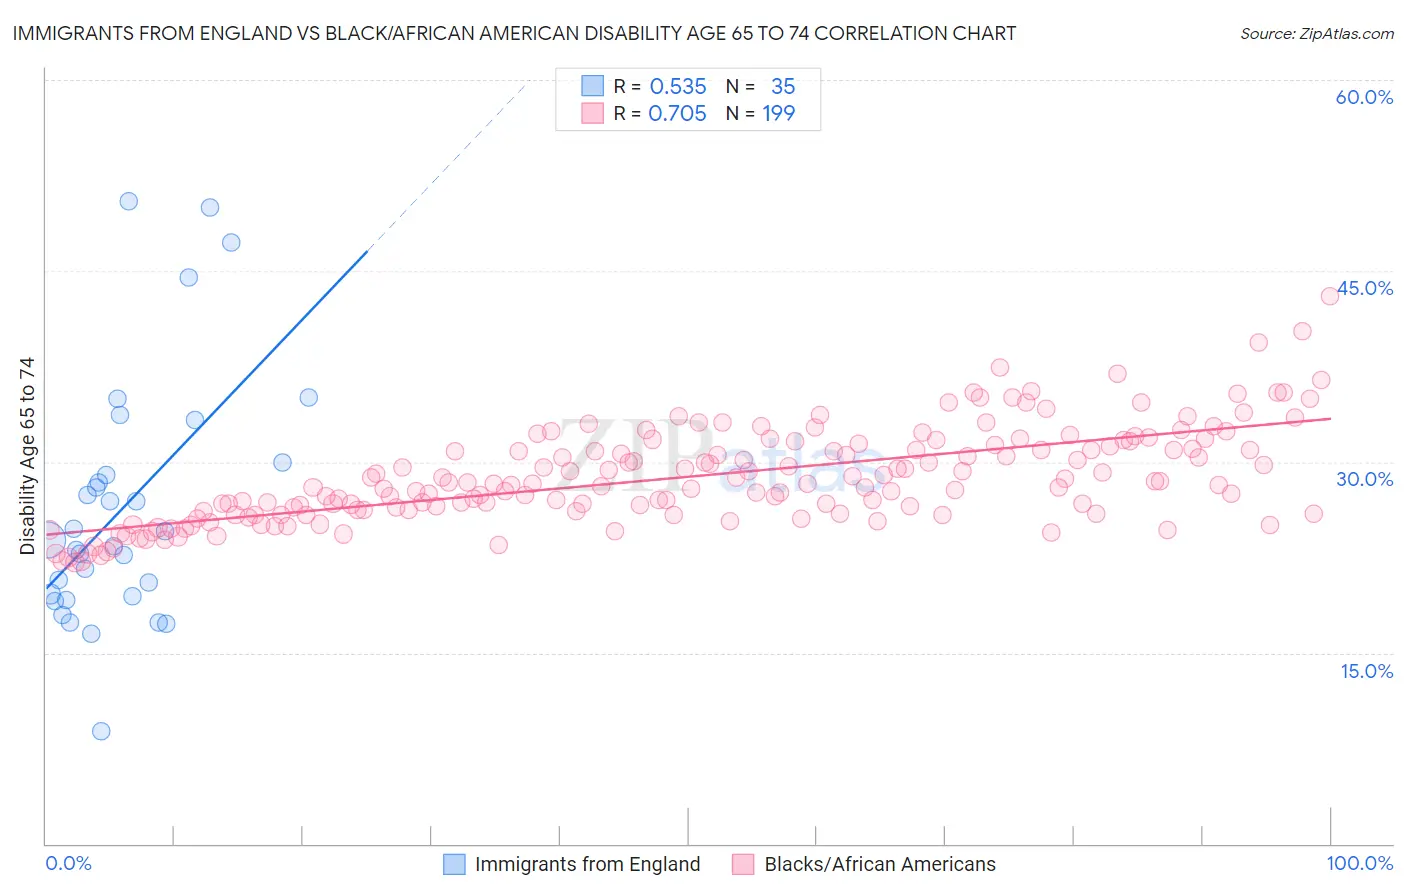 Immigrants from England vs Black/African American Disability Age 65 to 74